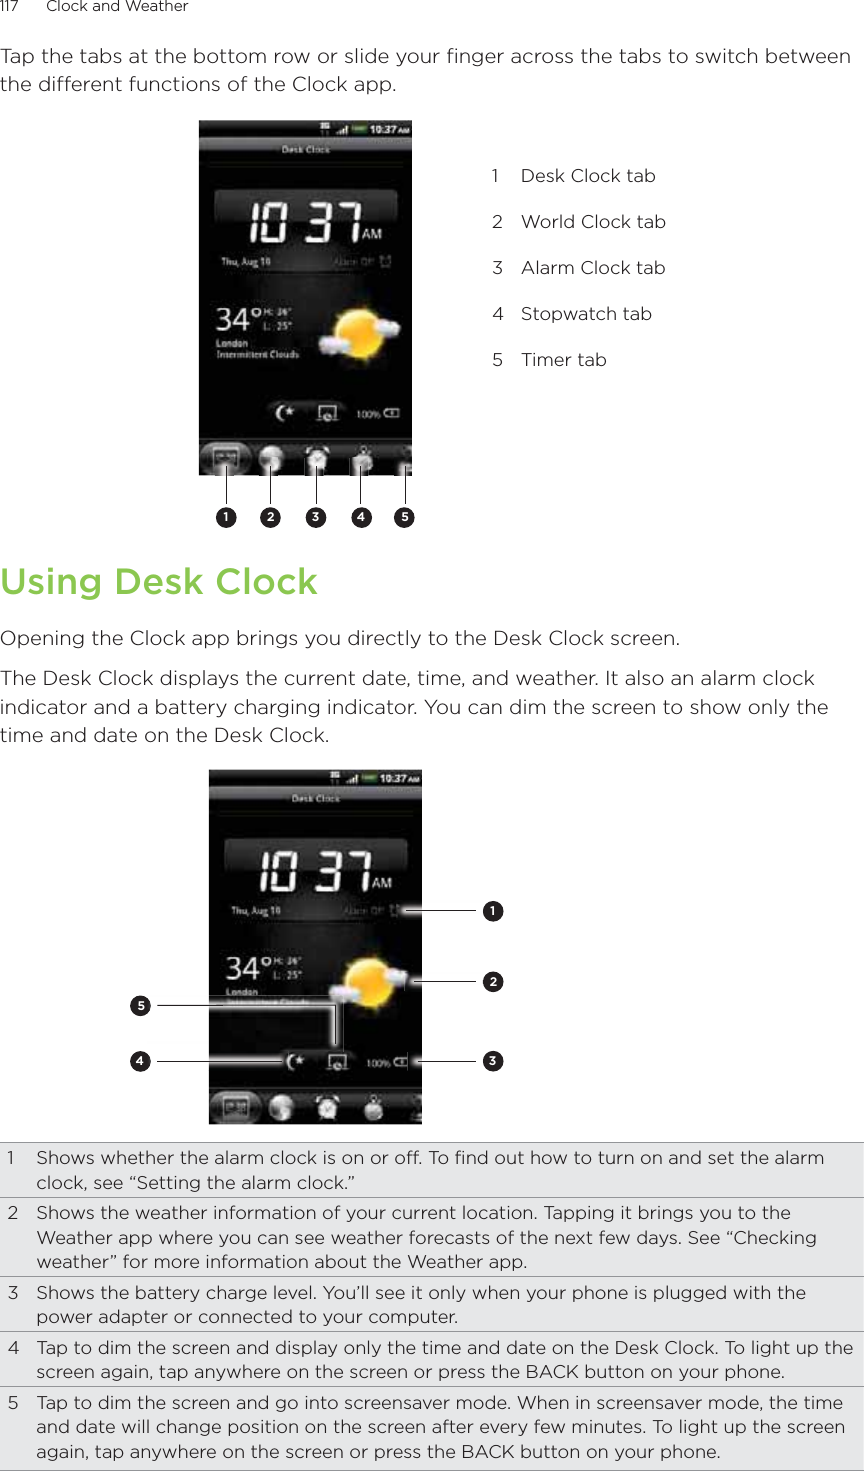 117      Clock and Weather      Tap the tabs at the bottom row or slide your finger across the tabs to switch between the different functions of the Clock app.2 3 4511  Desk Clock tab2  World Clock tab3  Alarm Clock tab4 Stopwatch tab5 Timer tabUsing Desk ClockOpening the Clock app brings you directly to the Desk Clock screen.The Desk Clock displays the current date, time, and weather. It also an alarm clock indicator and a battery charging indicator. You can dim the screen to show only the time and date on the Desk Clock.234511  Shows whether the alarm clock is on or off. To find out how to turn on and set the alarm clock, see “Setting the alarm clock.”2  Shows the weather information of your current location. Tapping it brings you to the Weather app where you can see weather forecasts of the next few days. See “Checking weather” for more information about the Weather app.3  Shows the battery charge level. You’ll see it only when your phone is plugged with the power adapter or connected to your computer.4  Tap to dim the screen and display only the time and date on the Desk Clock. To light up the screen again, tap anywhere on the screen or press the BACK button on your phone.5  Tap to dim the screen and go into screensaver mode. When in screensaver mode, the time and date will change position on the screen after every few minutes. To light up the screen again, tap anywhere on the screen or press the BACK button on your phone.